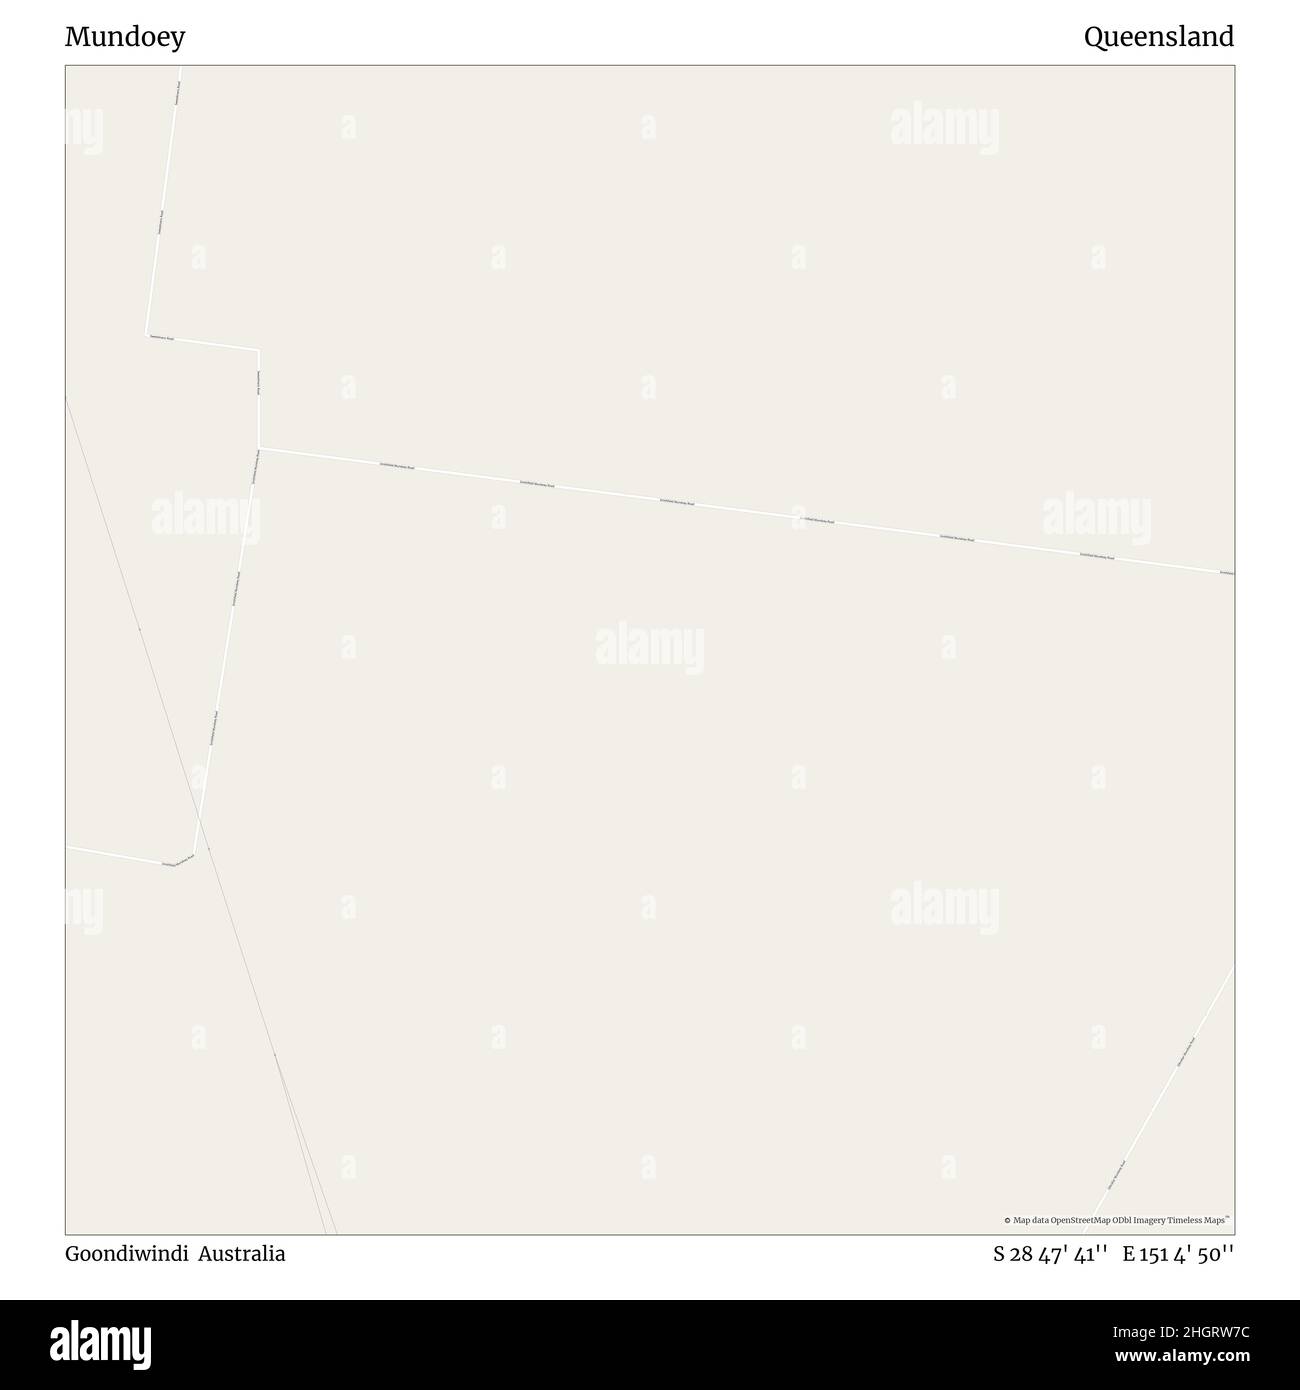 Mundoey, Goondiwindi, Australia, Queensland, S 28 47' 41'', E 151 4' 50'', map, Timeless Map published in 2021. Travelers, explorers and adventurers like Florence Nightingale, David Livingstone, Ernest Shackleton, Lewis and Clark and Sherlock Holmes relied on maps to plan travels to the world's most remote corners, Timeless Maps is mapping most locations on the globe, showing the achievement of great dreams Stock Photo